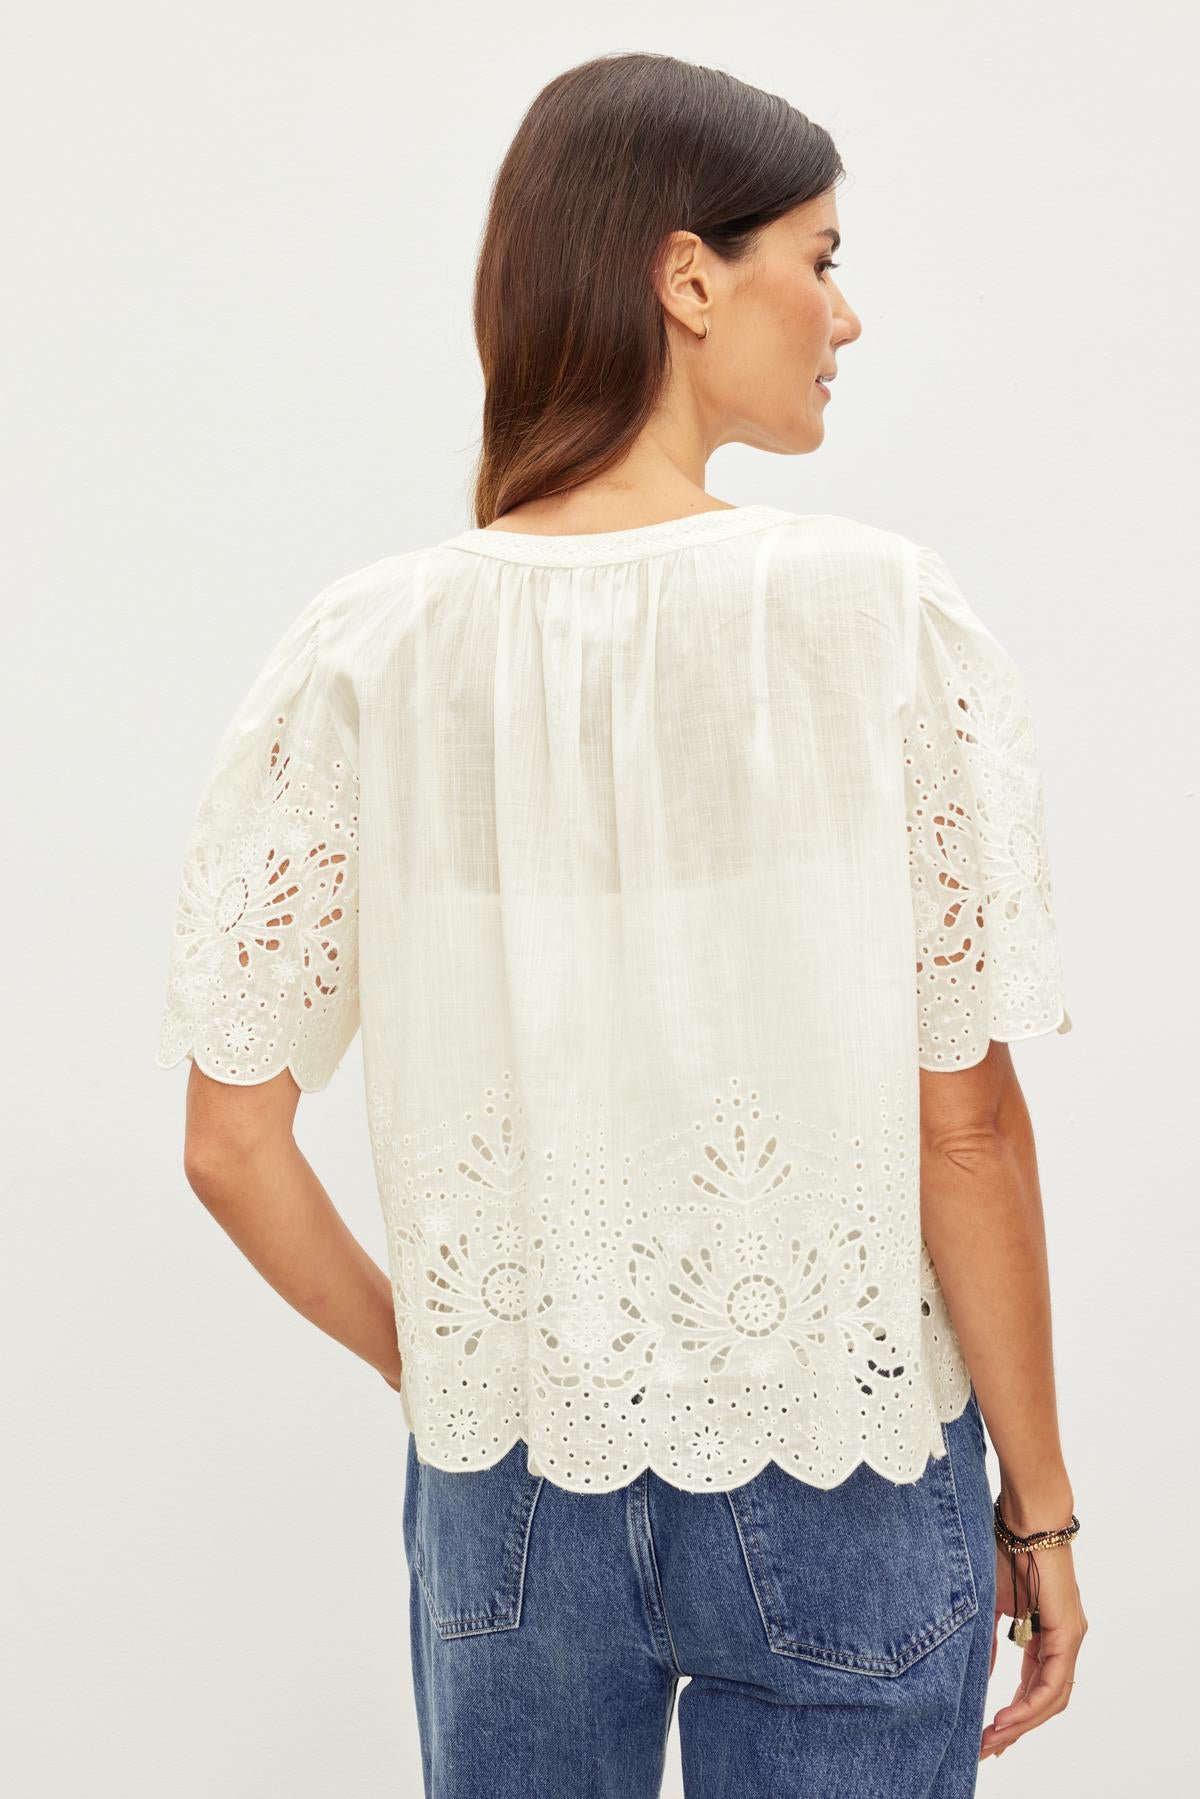 Woman in a white blouse with RAZI EMBROIDERED COTTON LACE details, viewed from the back, standing against a plain background.-36454010618049